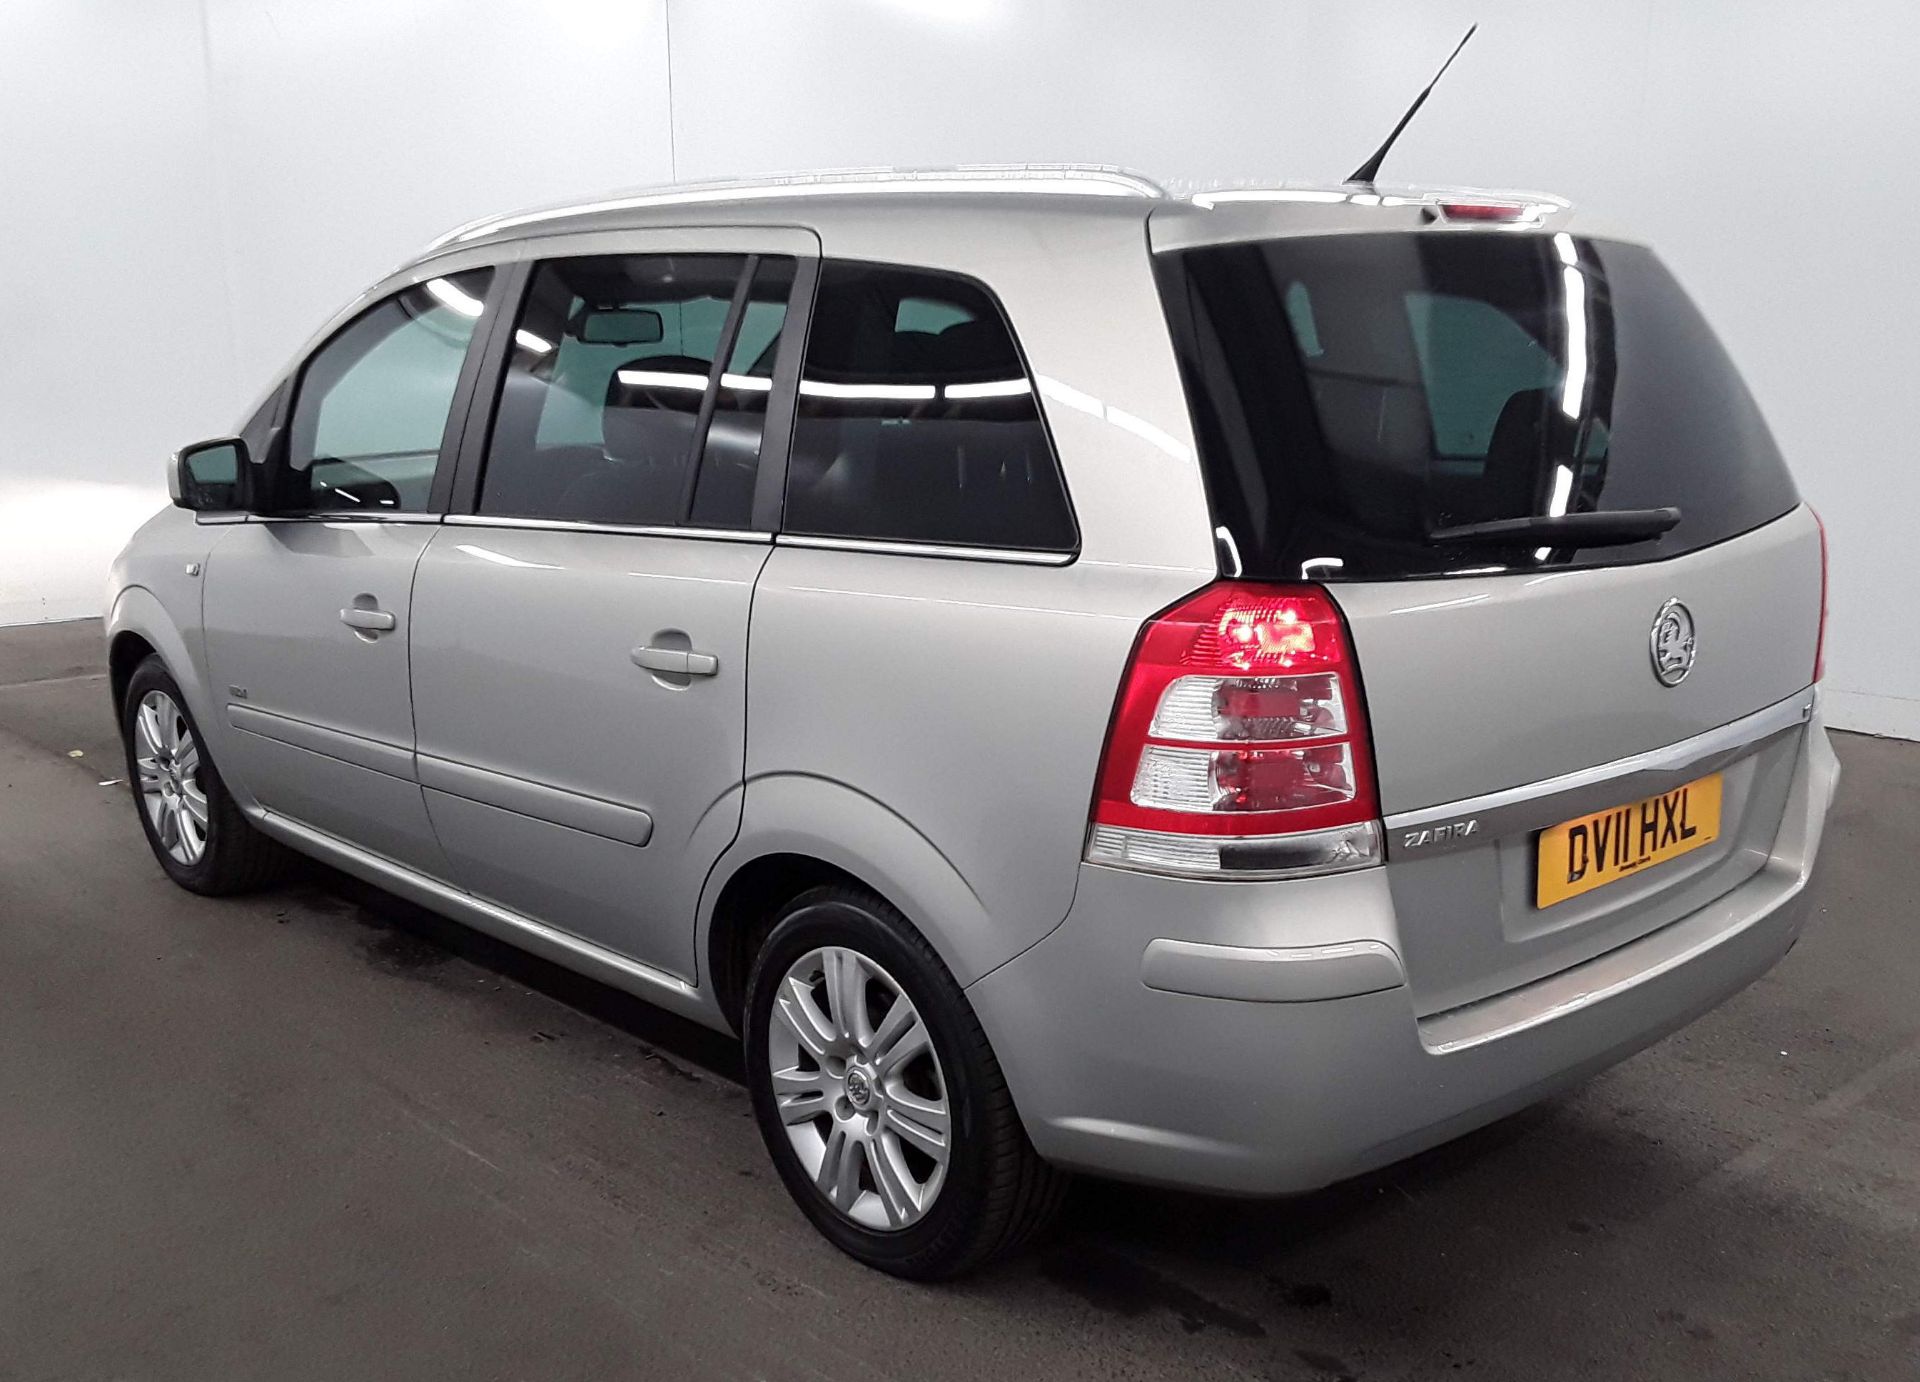 2011 Vauxhall Zafira 1.8 Design 5 Door MPV - CL505 - NO VAT ON THE HAMMER - Location: Corby - Image 9 of 12